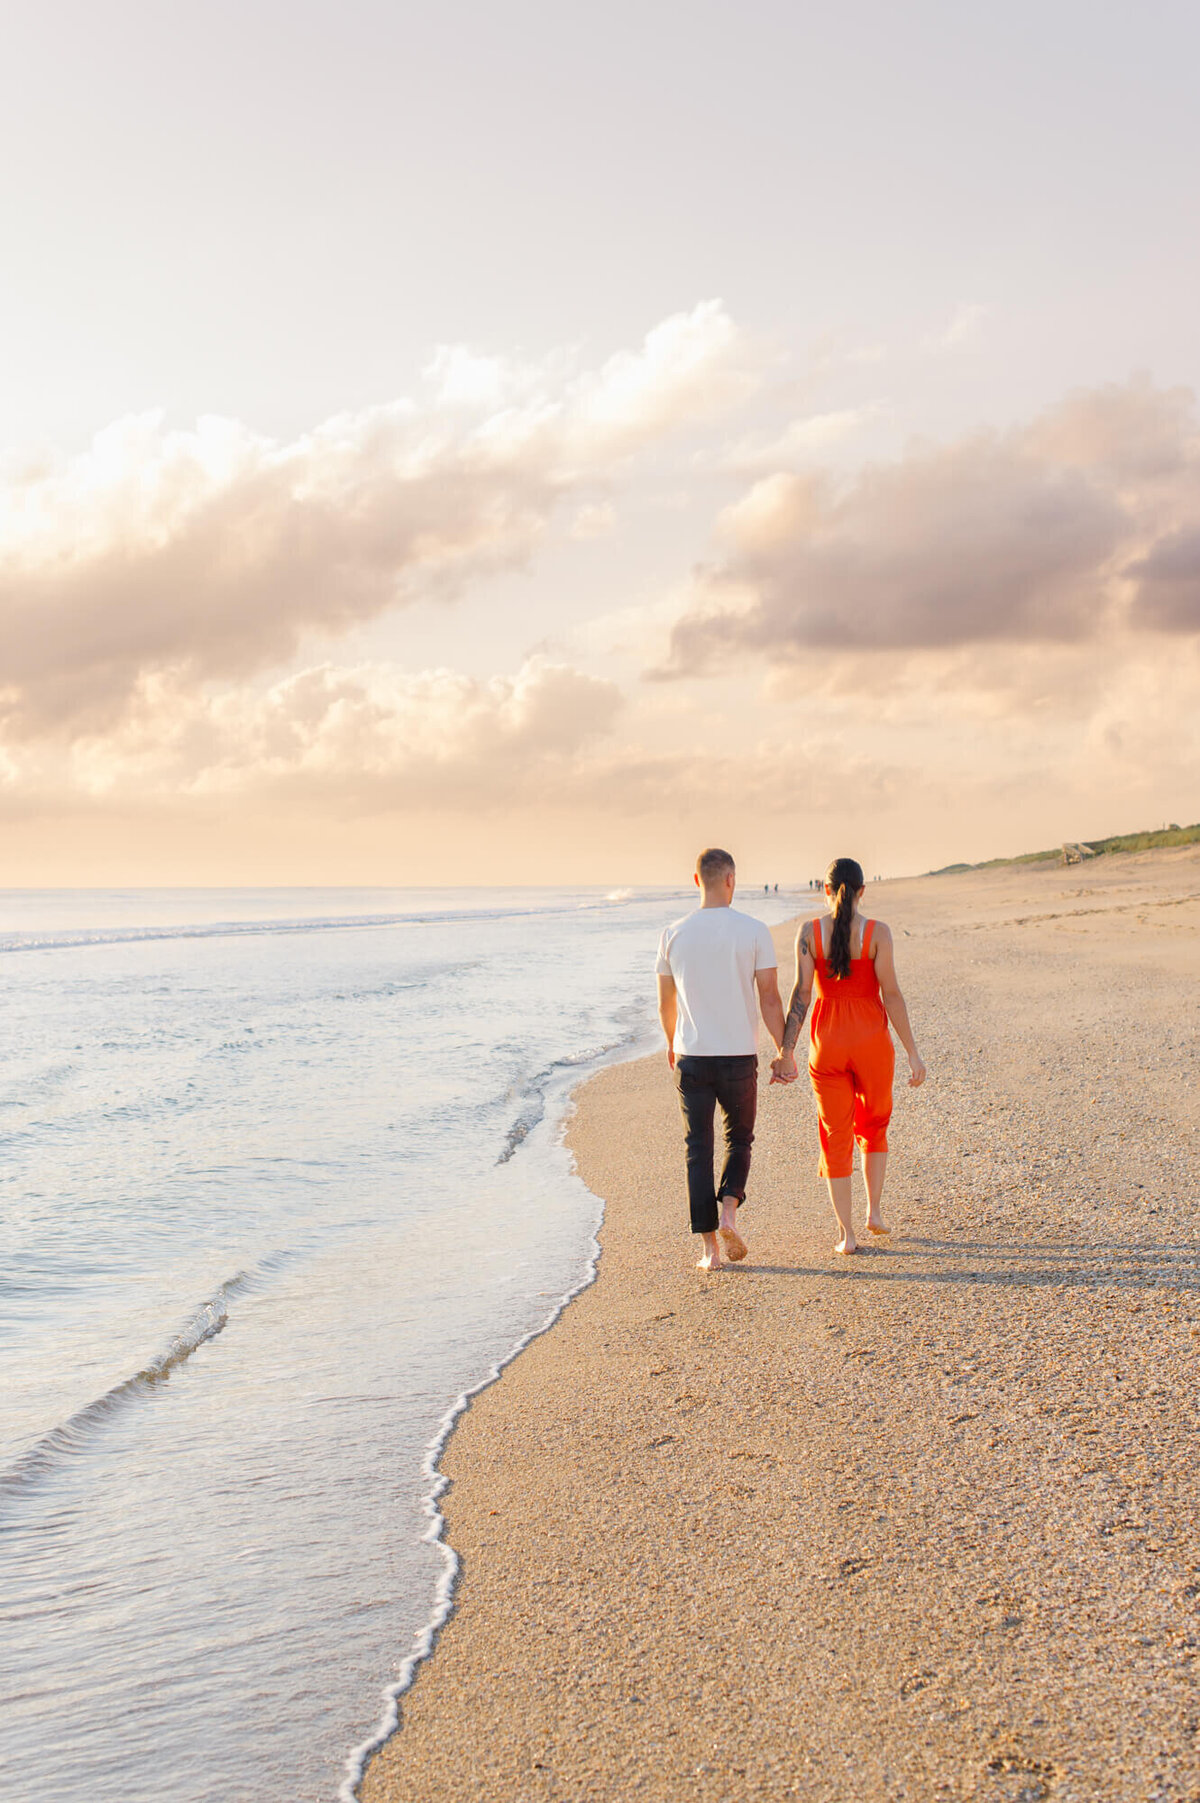 Couple walking away down the beach next to the shoreline at sunrise